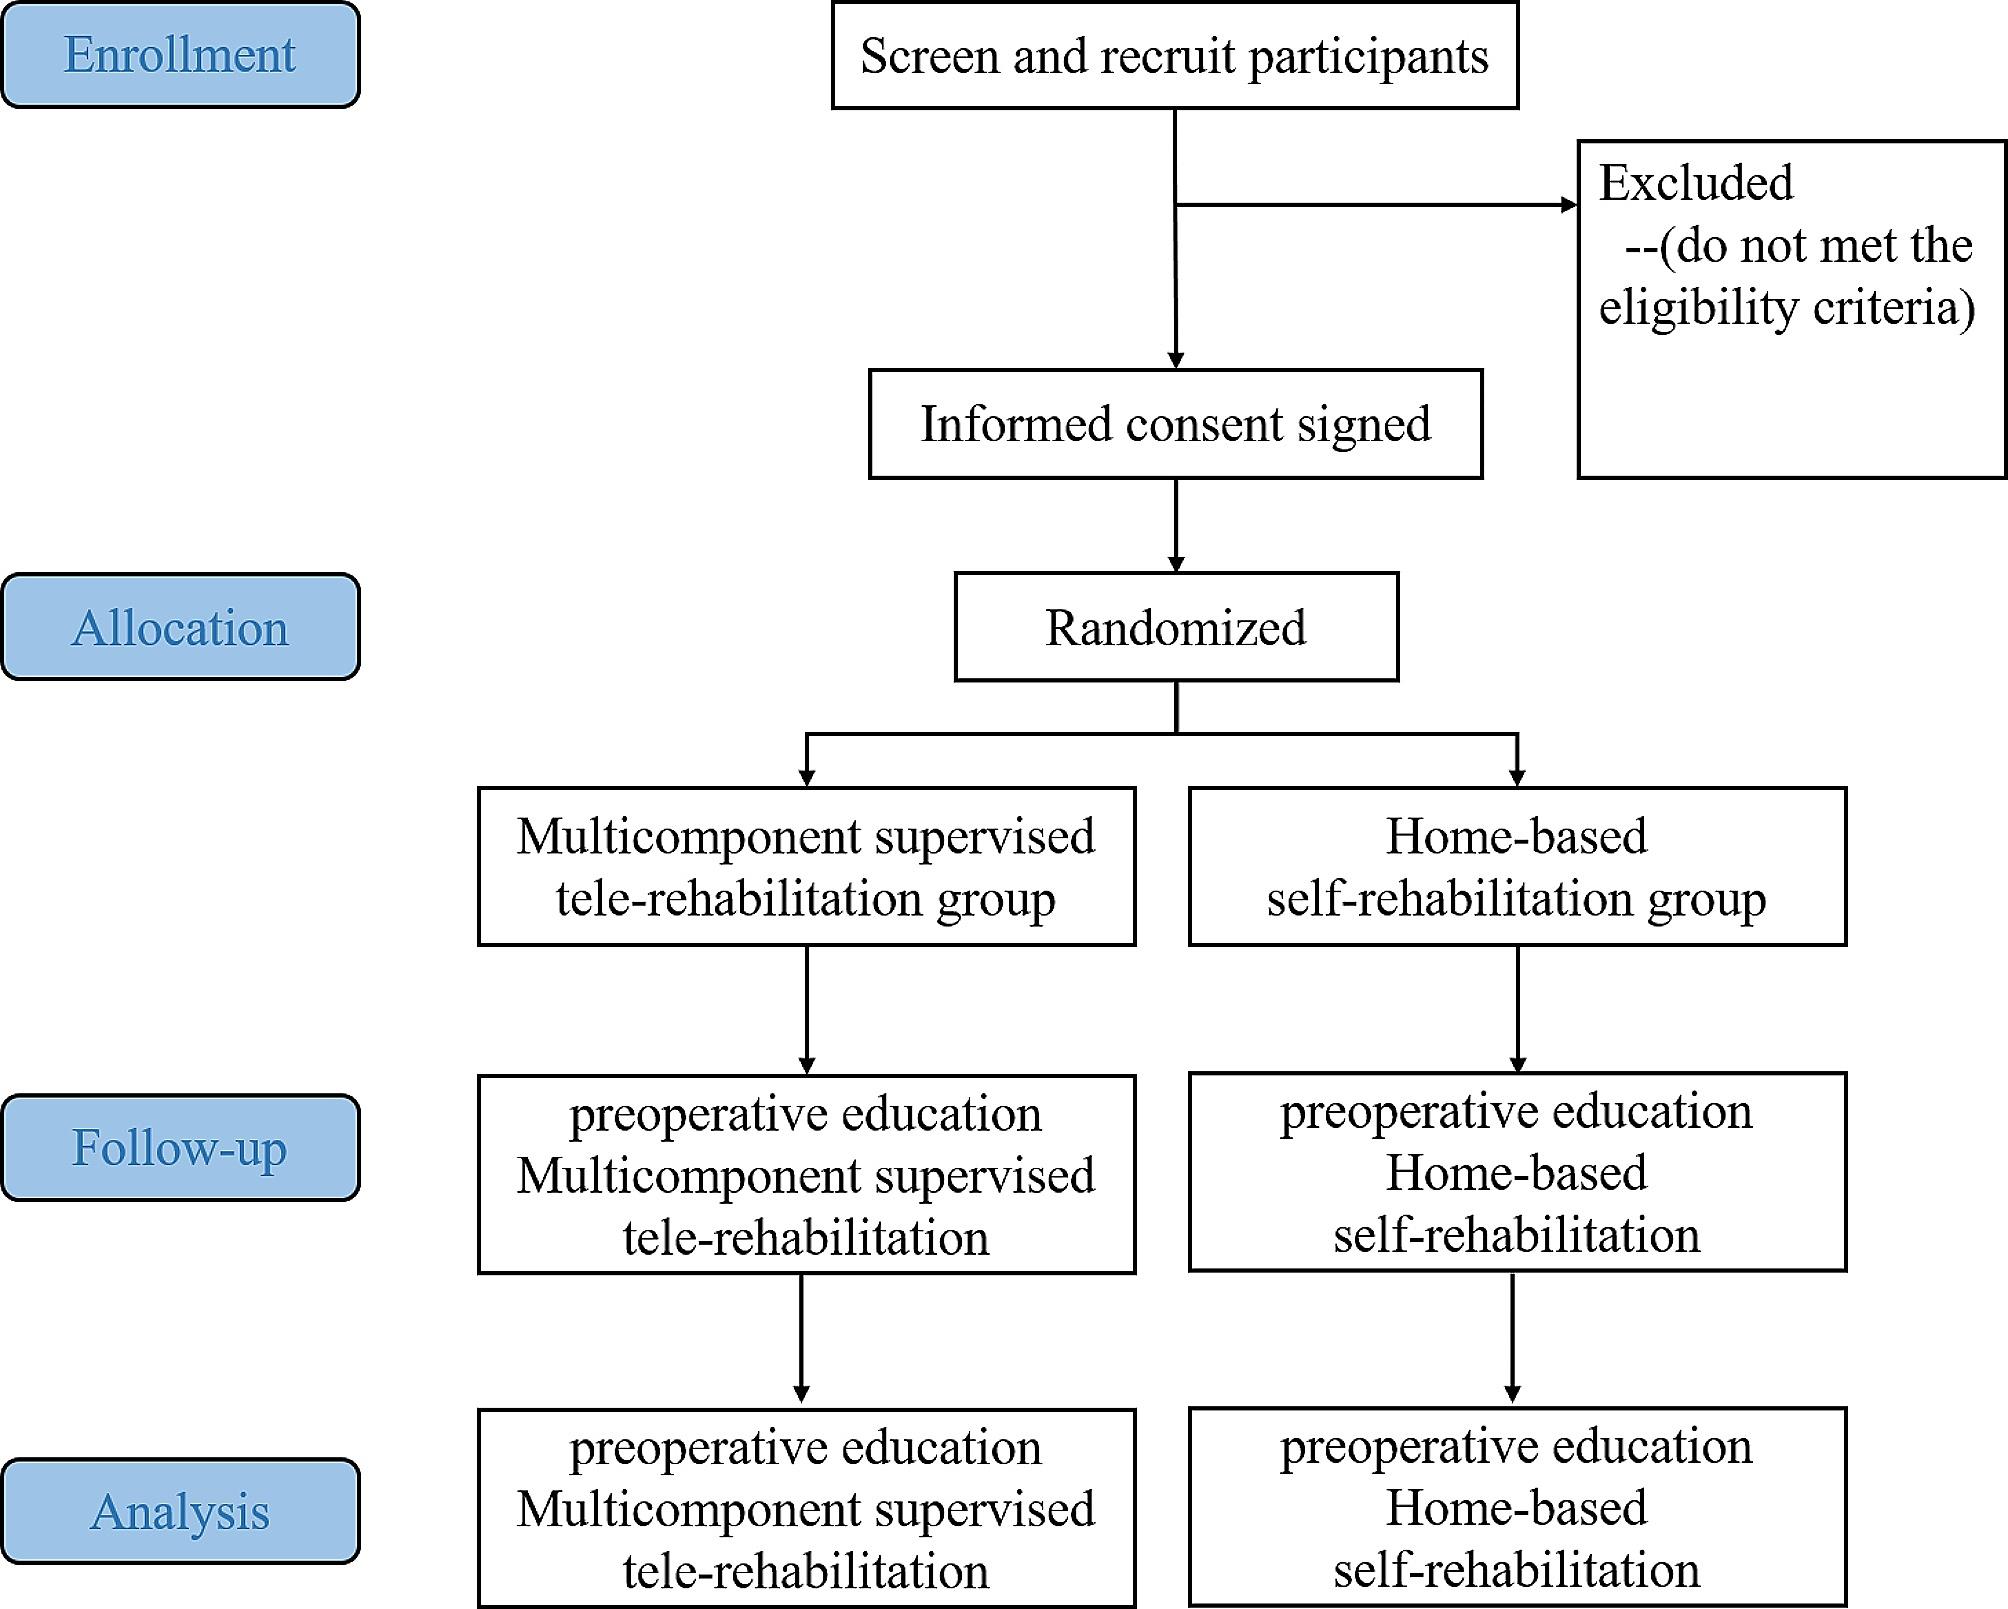 Multicomponent supervised tele-rehabilitation versus home-based self-rehabilitation management after anterior cruciate ligament reconstruction: a study protocol for a randomized controlled trial